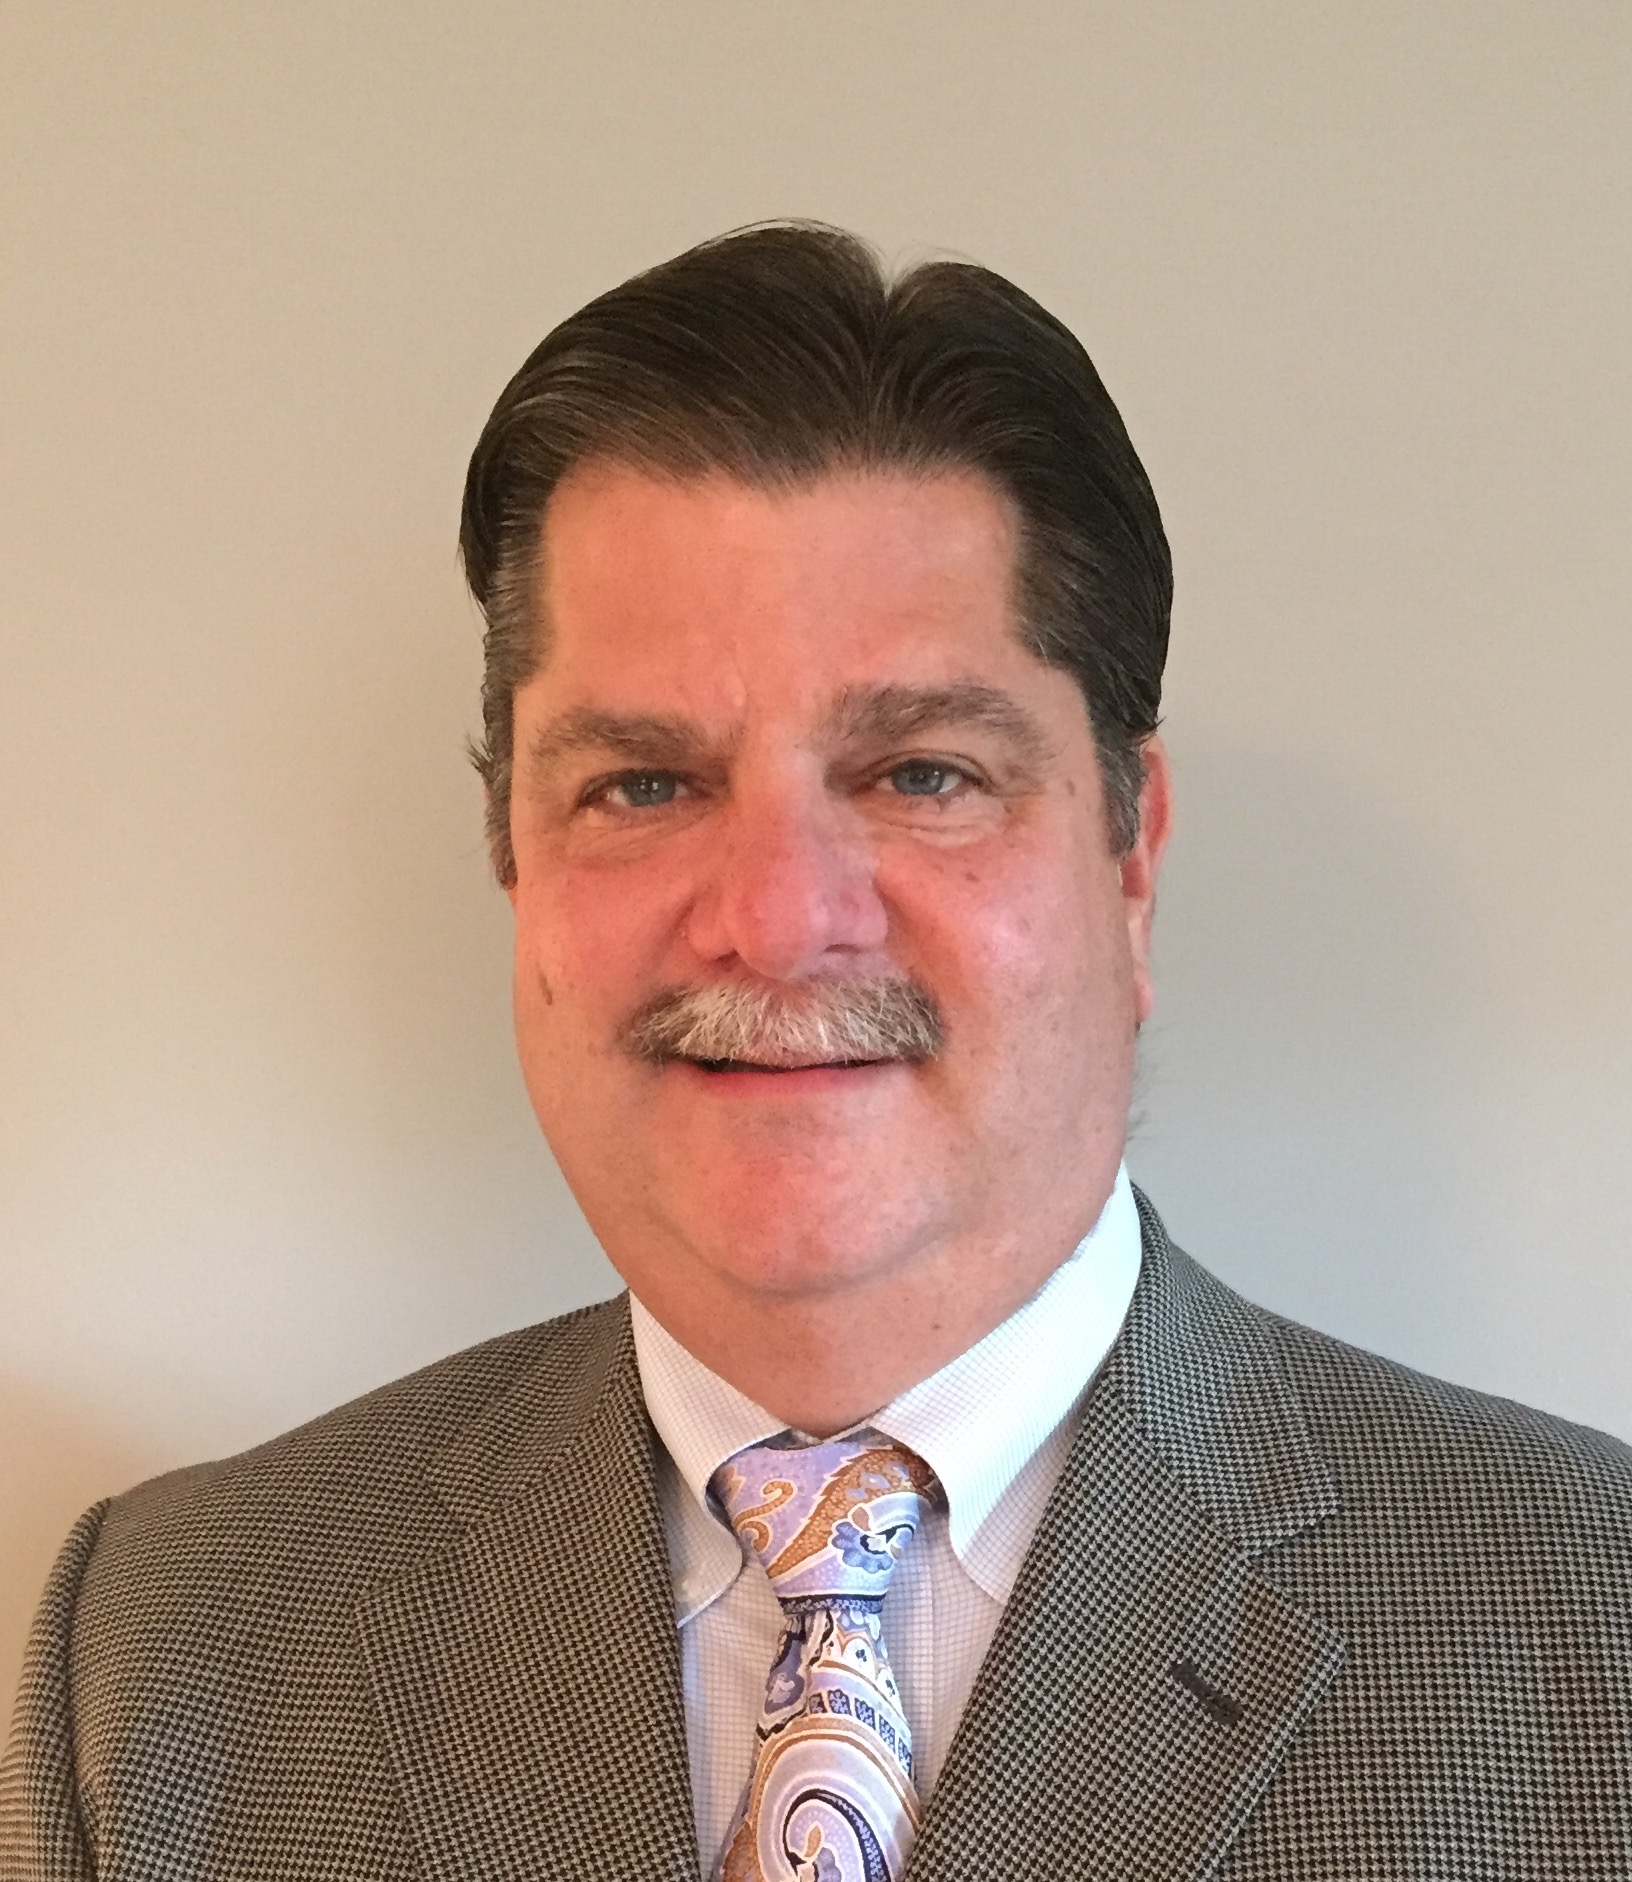 MAX USA Corp. would like to announce the hiring of Gary Tharp, its new Southwest Regional Sales Executive.  